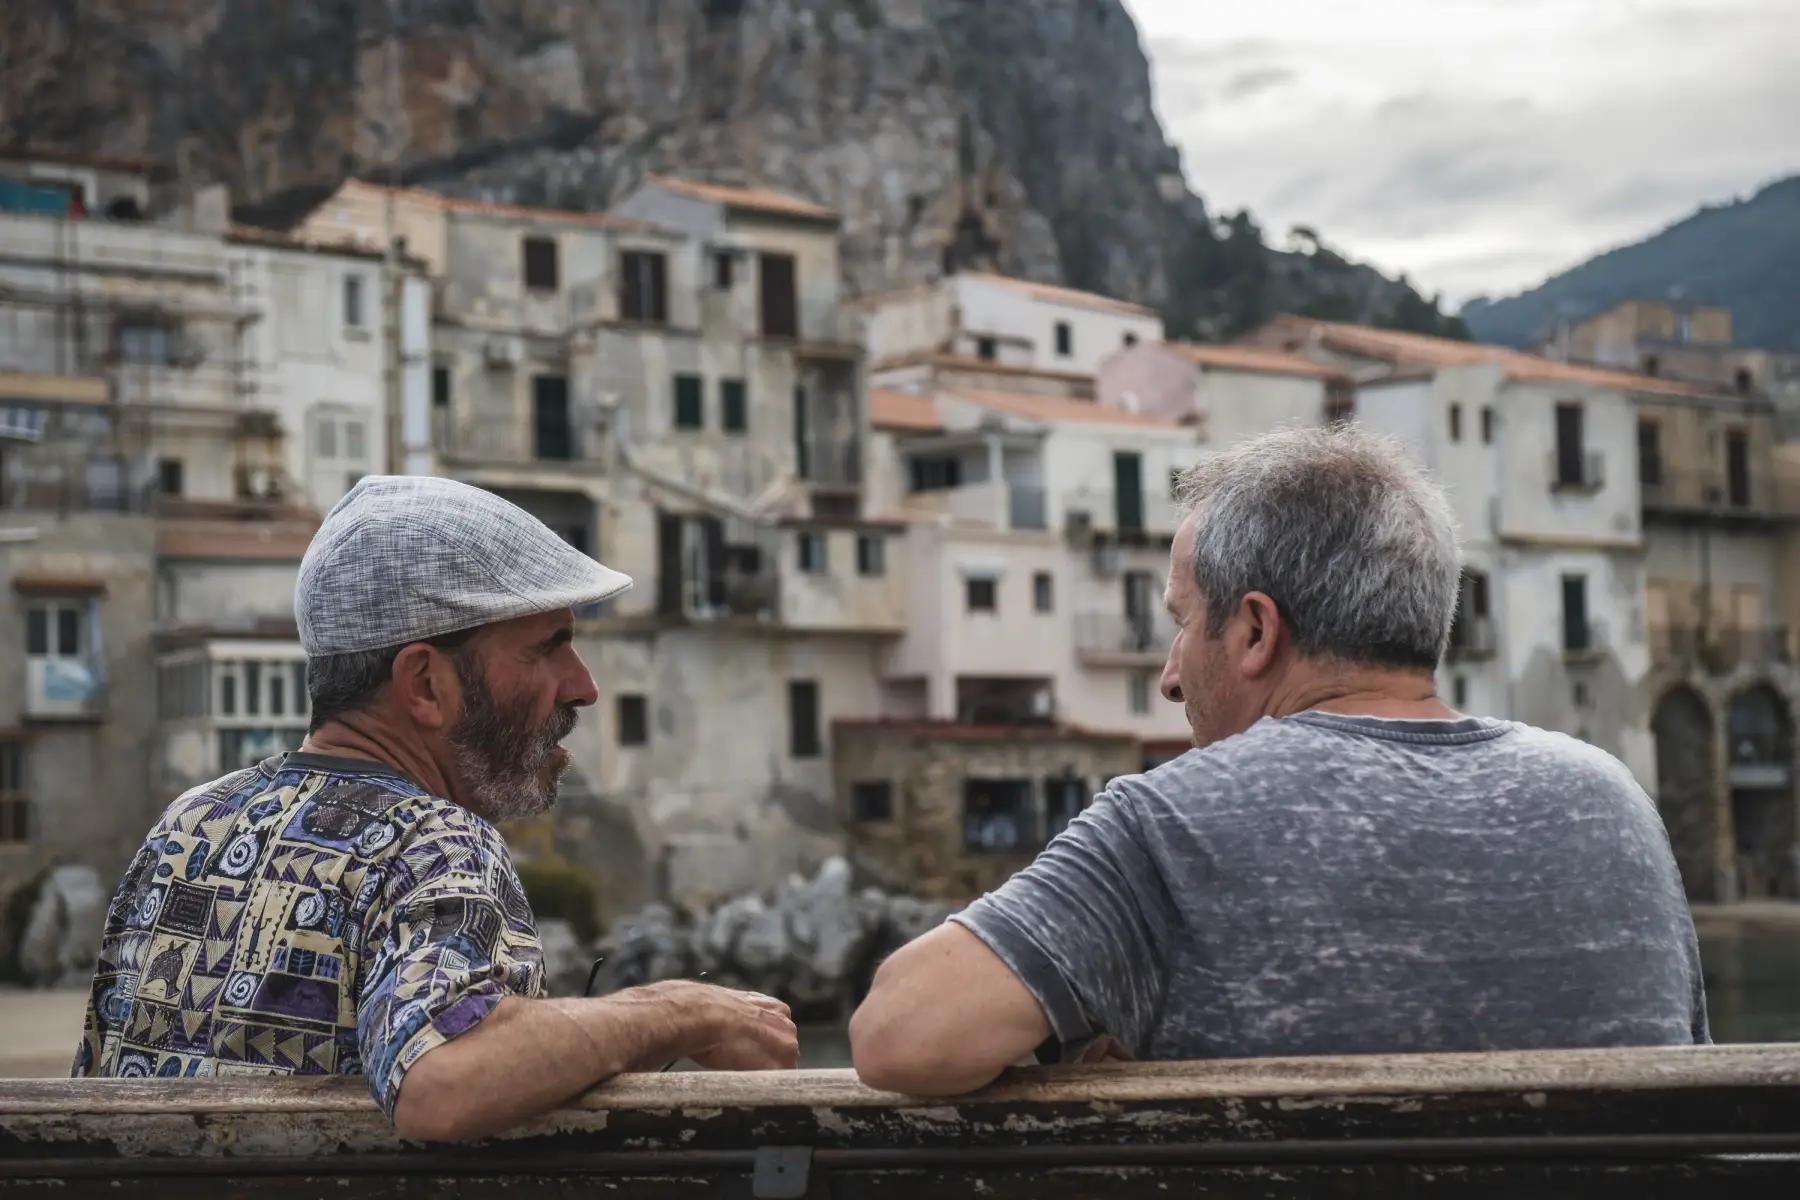 Two men having a deep conversation on a bench, the village of Cefalu in the background